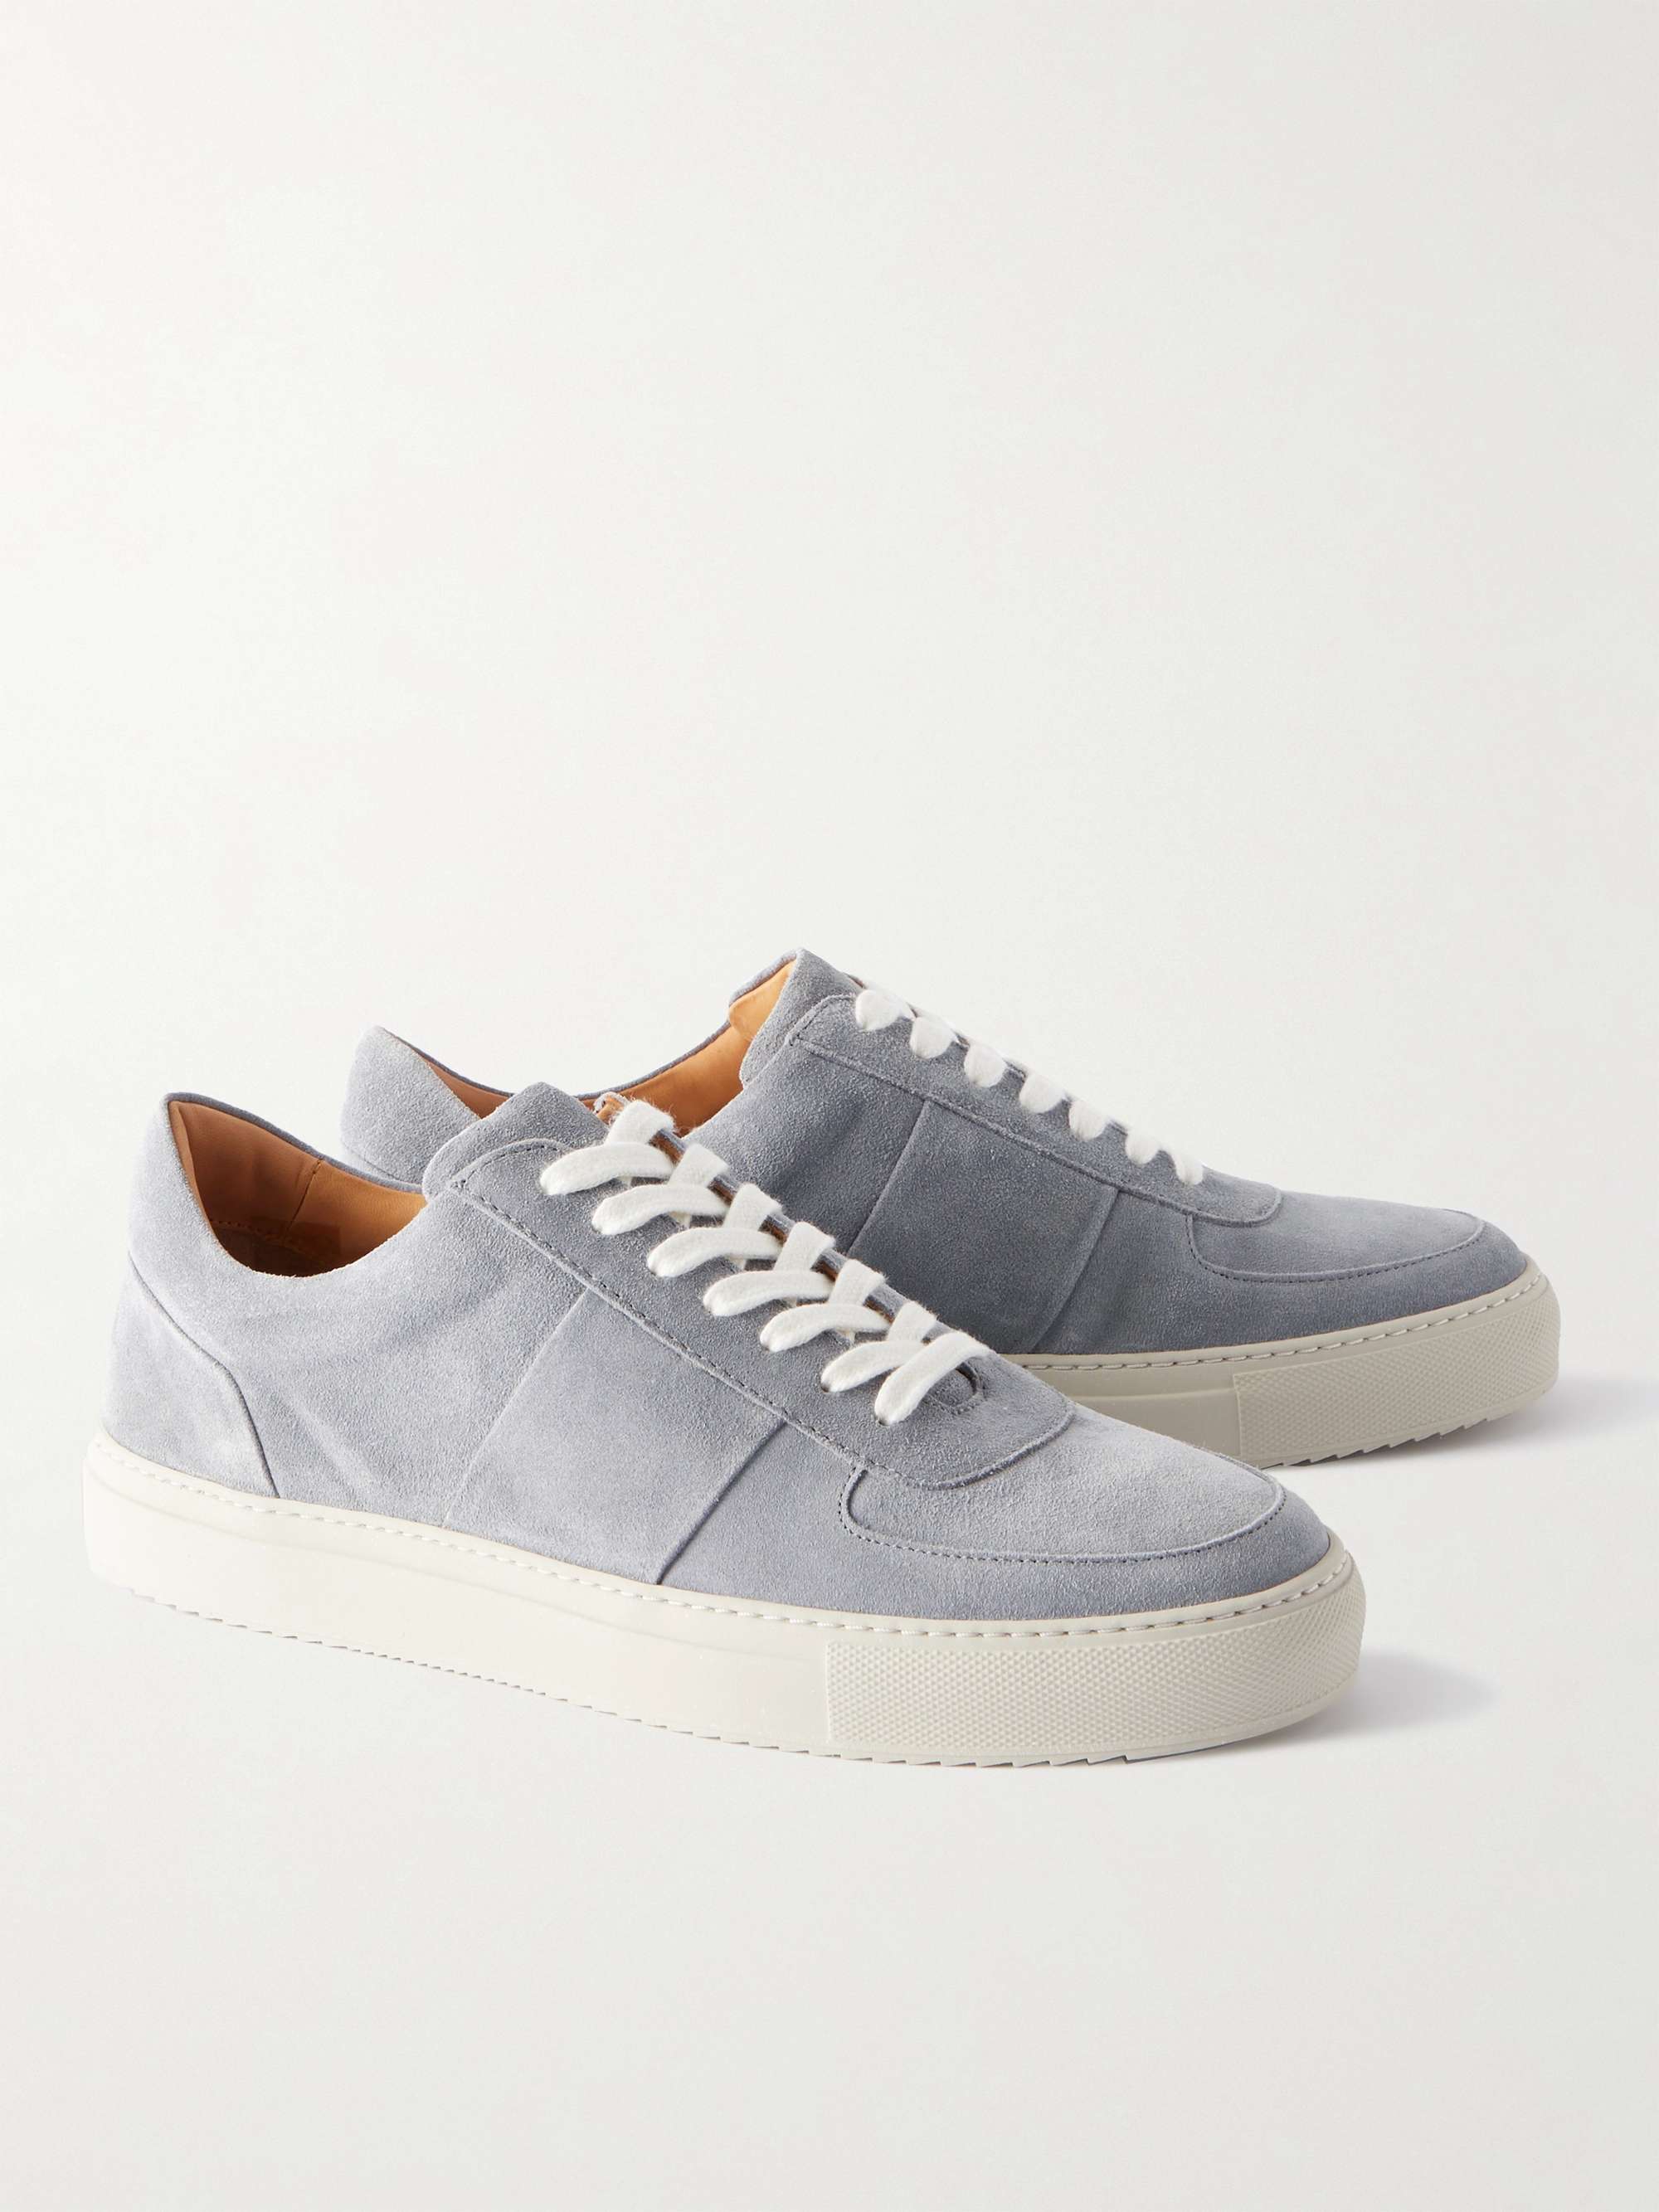 MR P. Larry Suede and Leather Sneakers